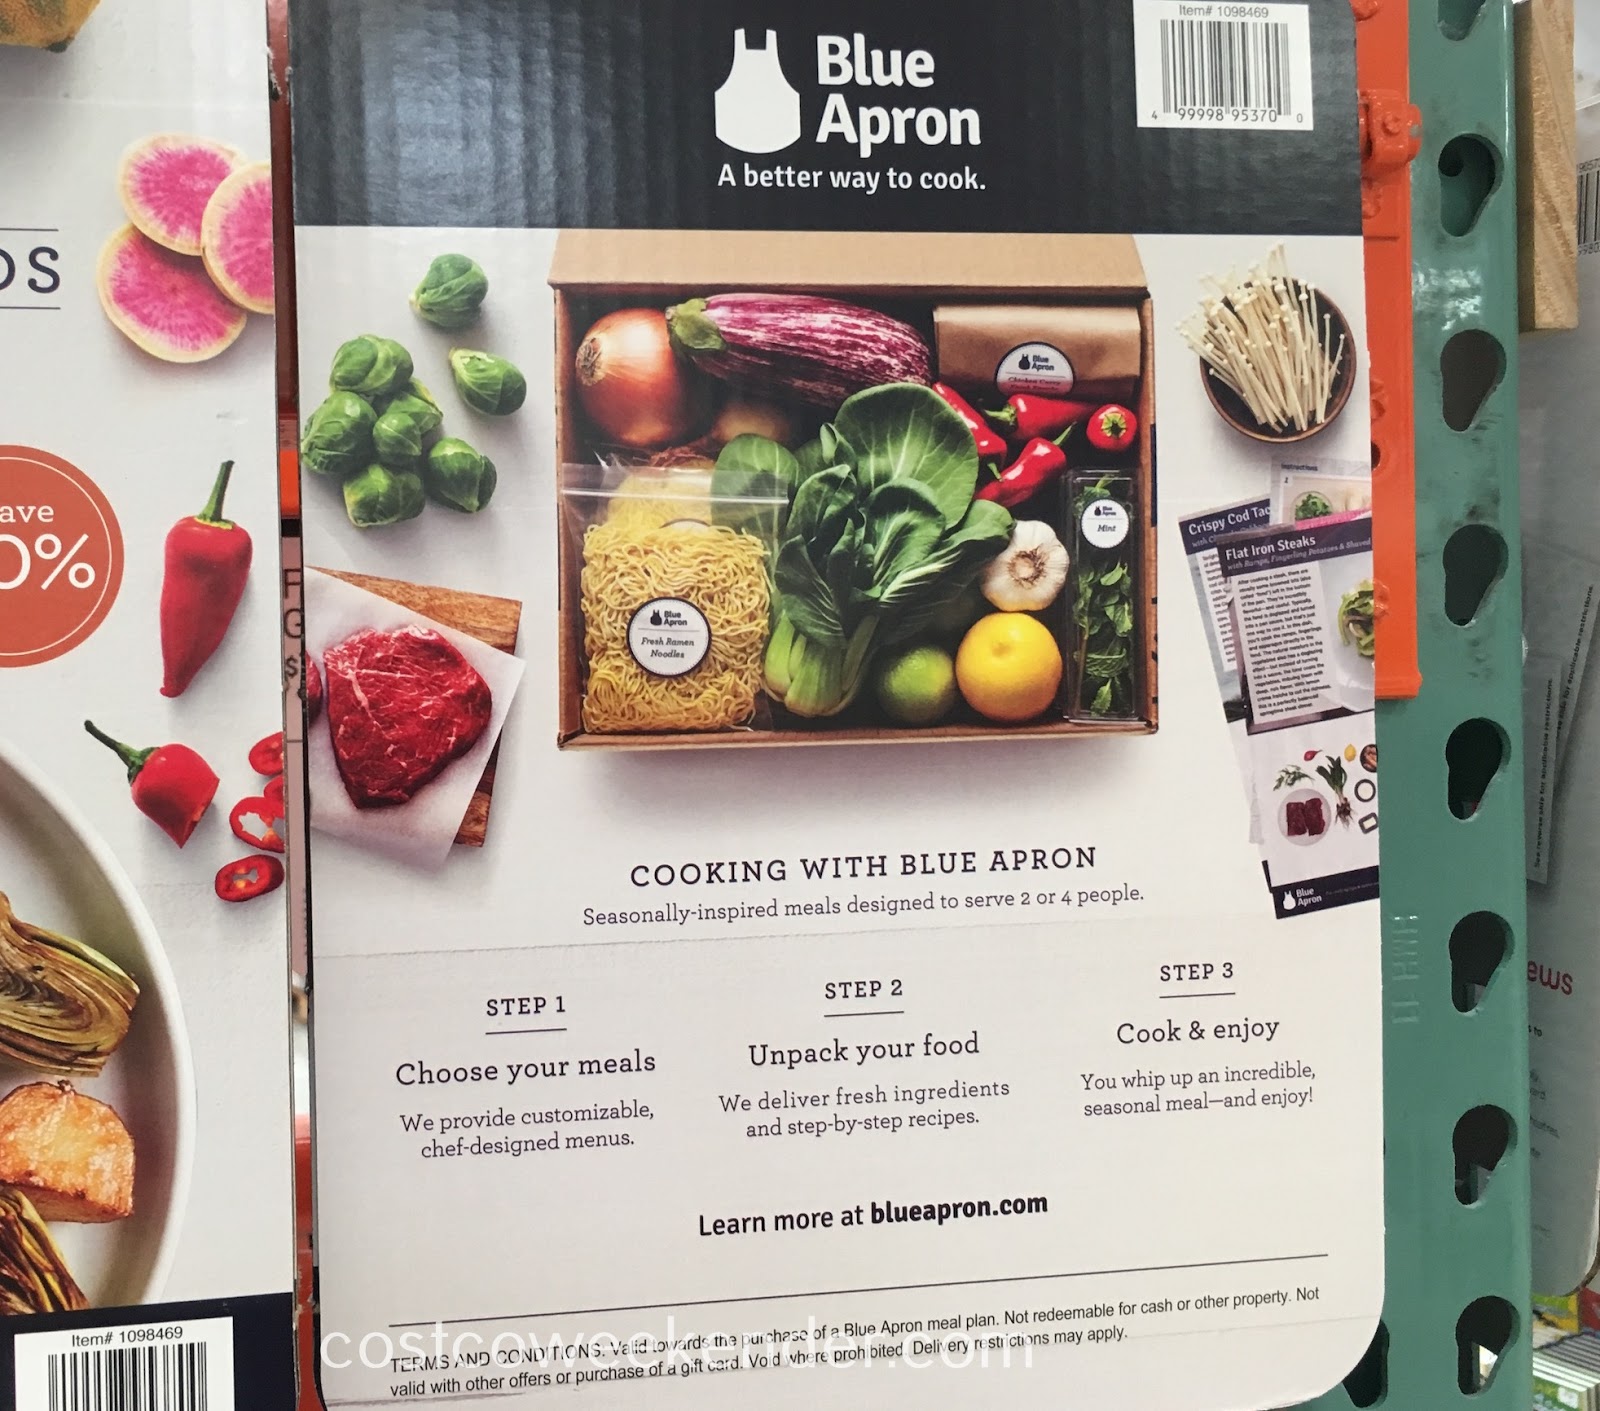 (EXPIRED) Costco: Buy $ Blue Apron Gift Cards For $ - Gift Cards Galore